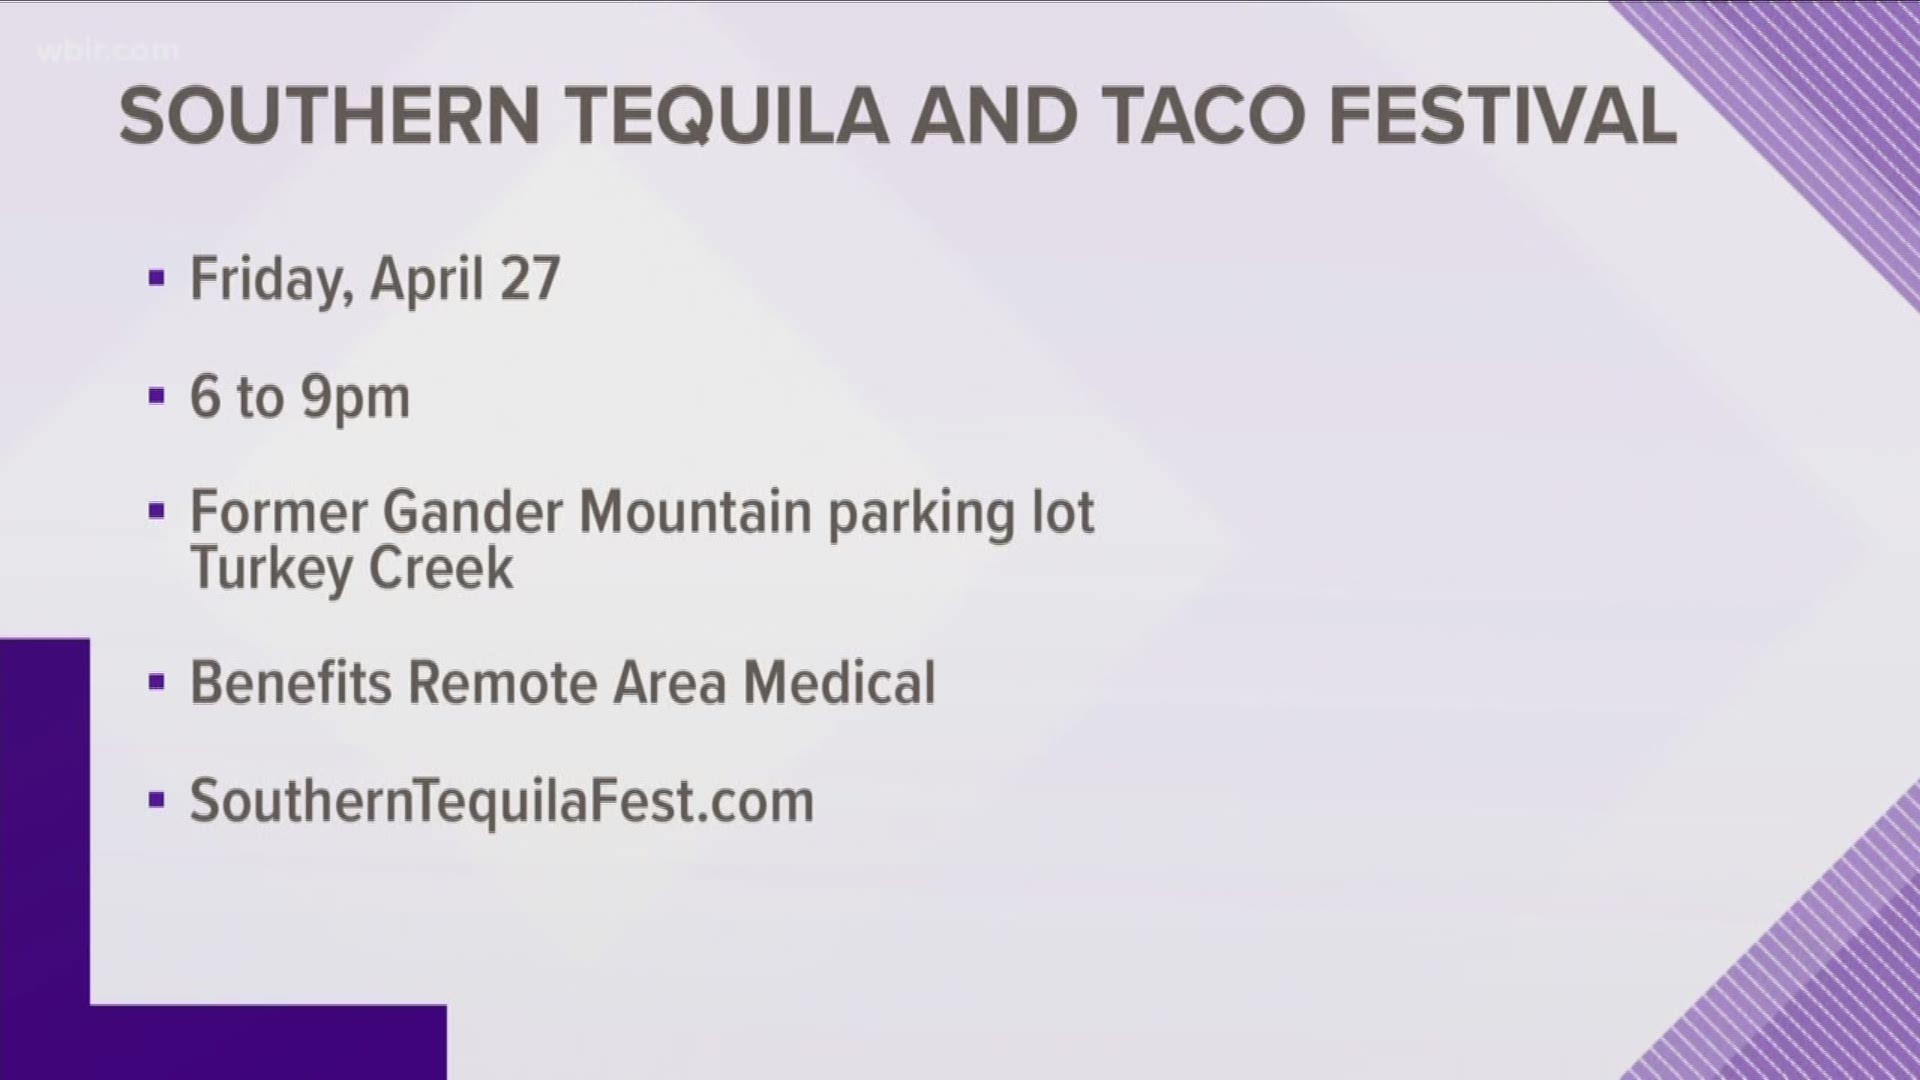 The Southern Tequila and Taco Festival runs from 6 to 9pm in the former Gander Mountain Parking Lot (Turkey Creek) Event benefits Remote Area Medical (RAM) which is based in Knoxville. For more information visit SouthernTequilaFest.com.